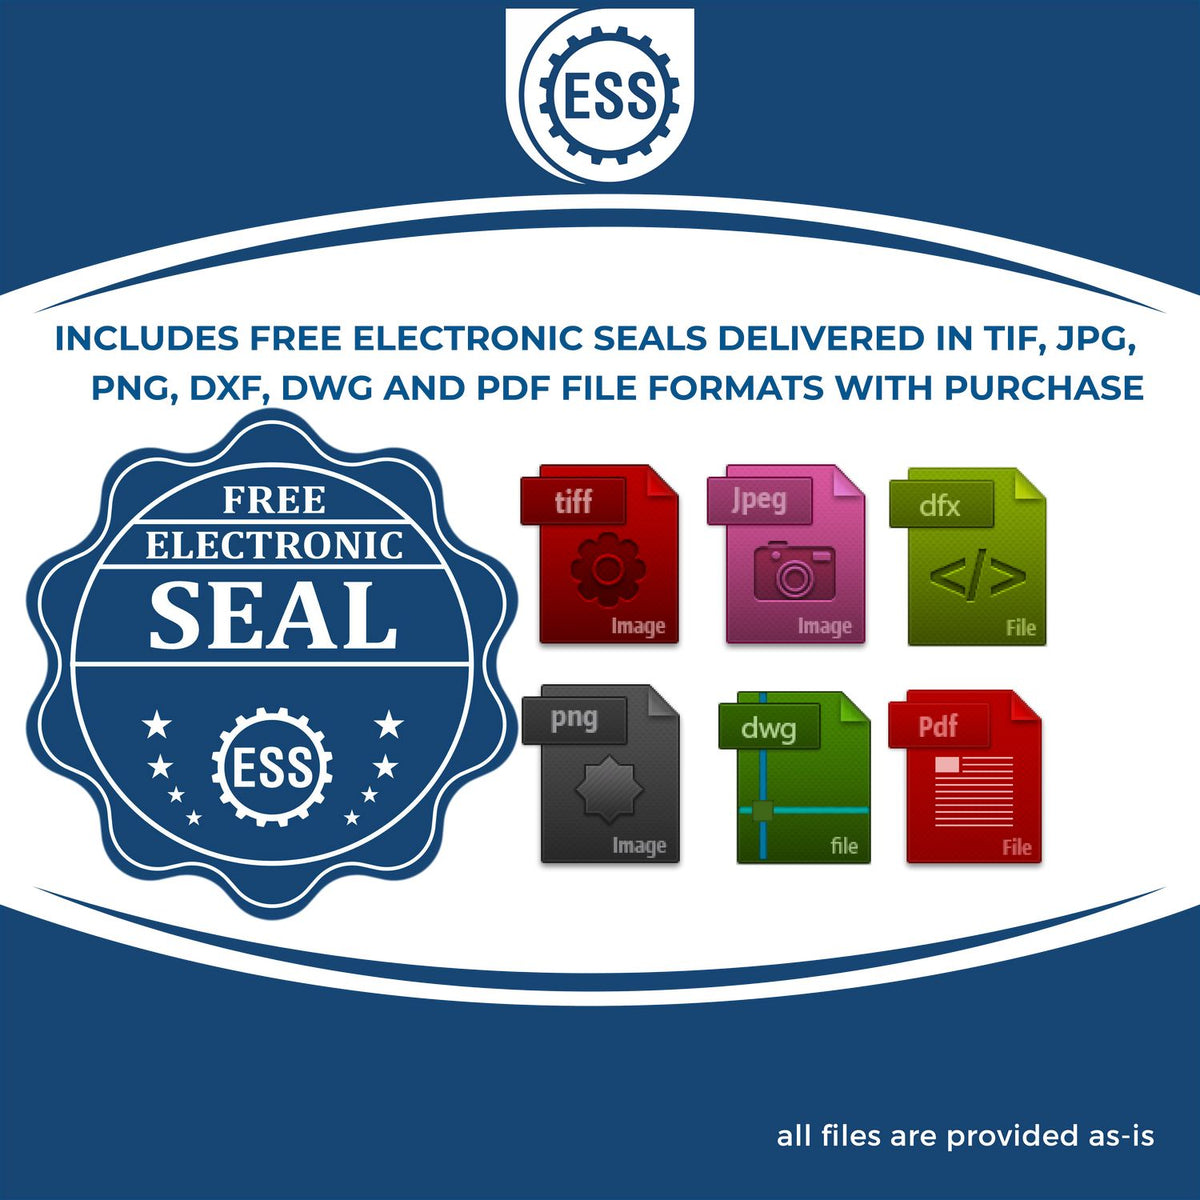 An infographic for the free electronic seal for the Hybrid Utah Architect Seal illustrating the different file type icons such as DXF, DWG, TIF, JPG and PNG.